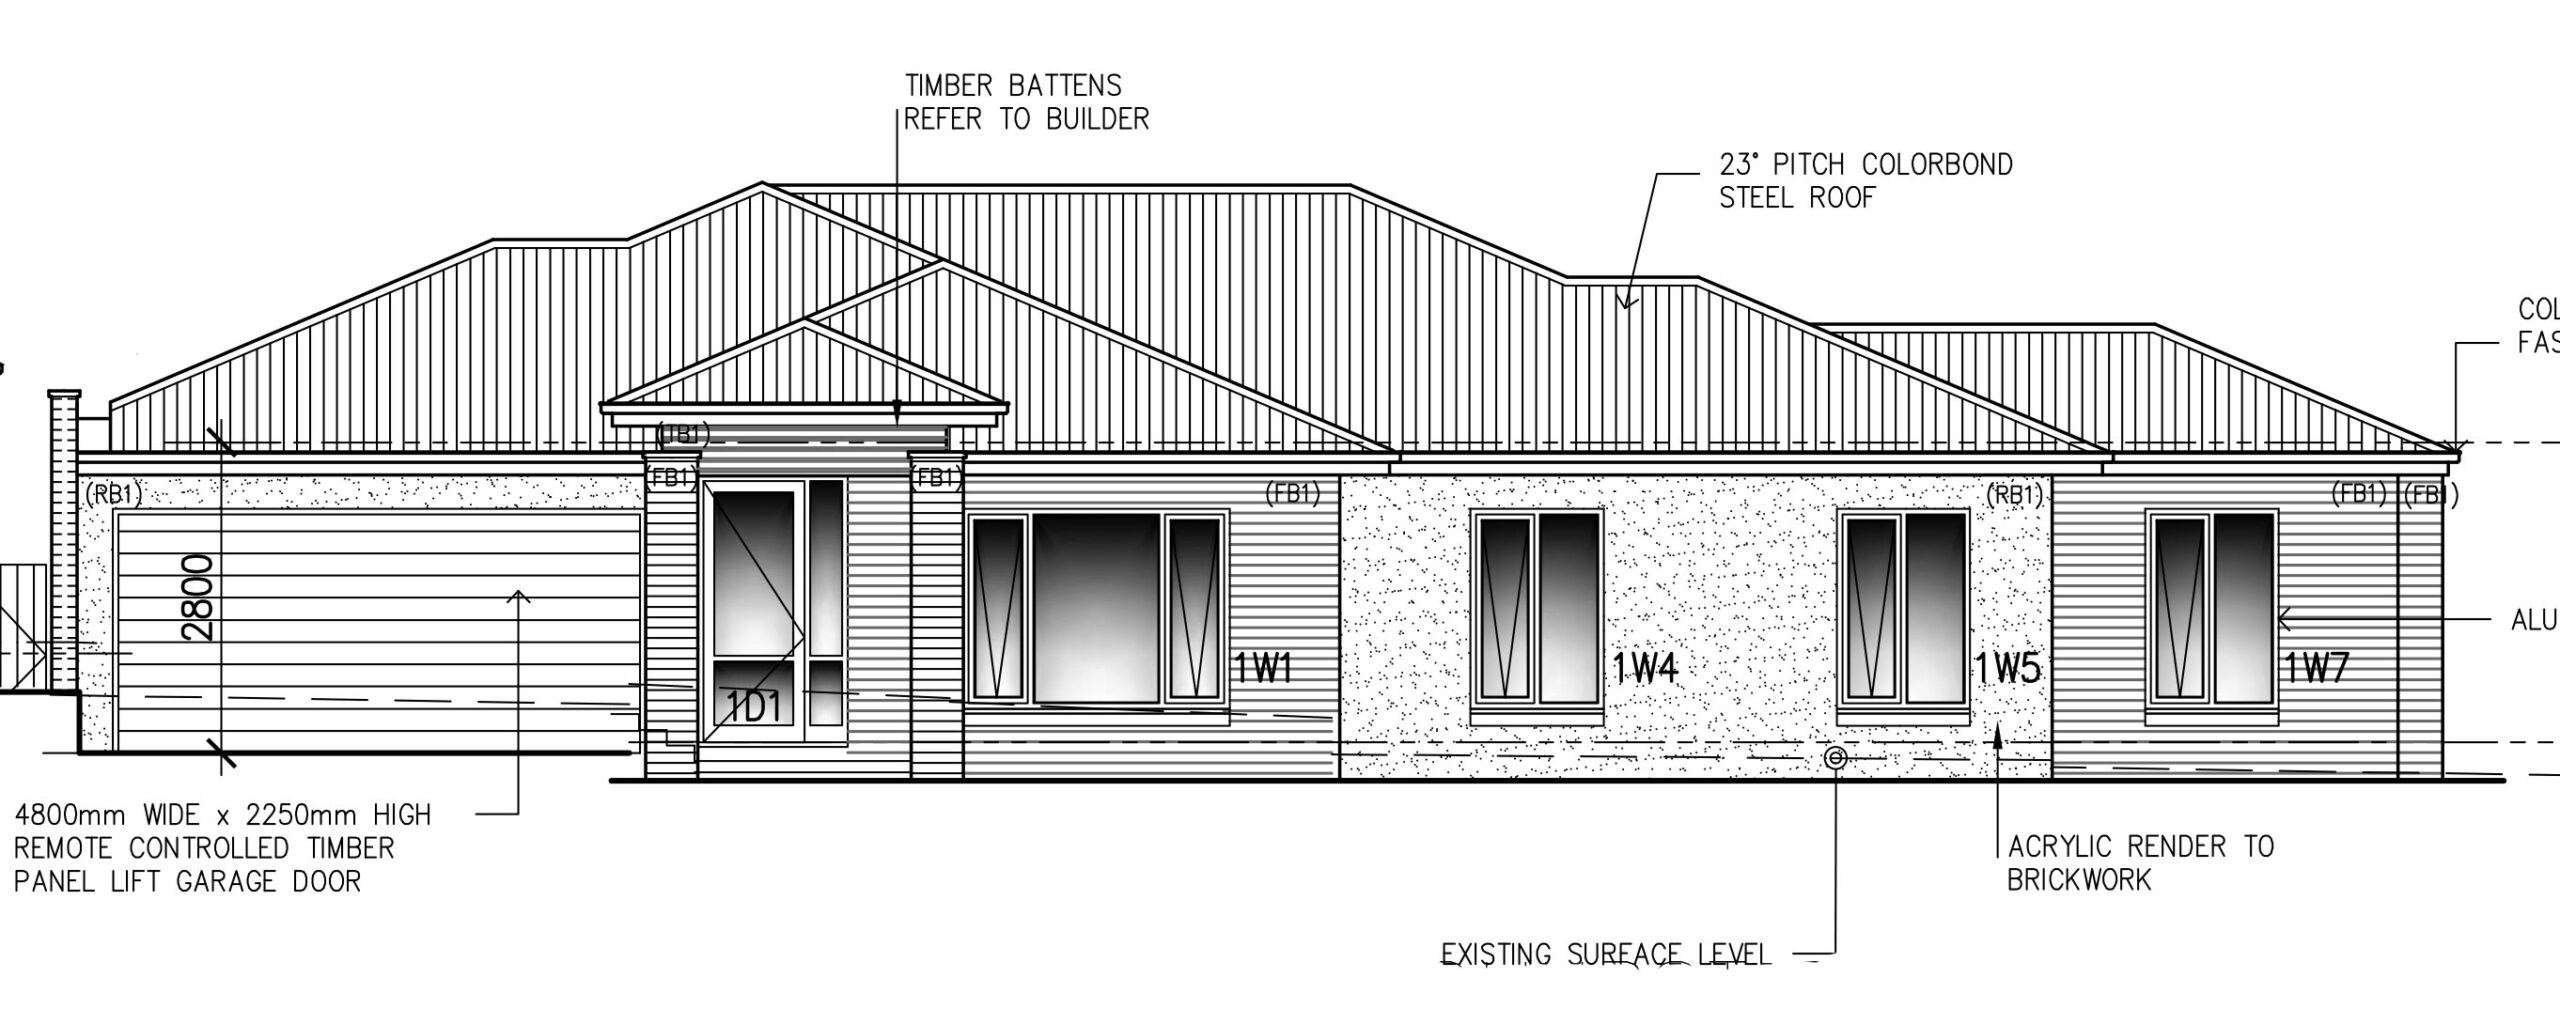 Builder's plan for a new home in NE Melbourne